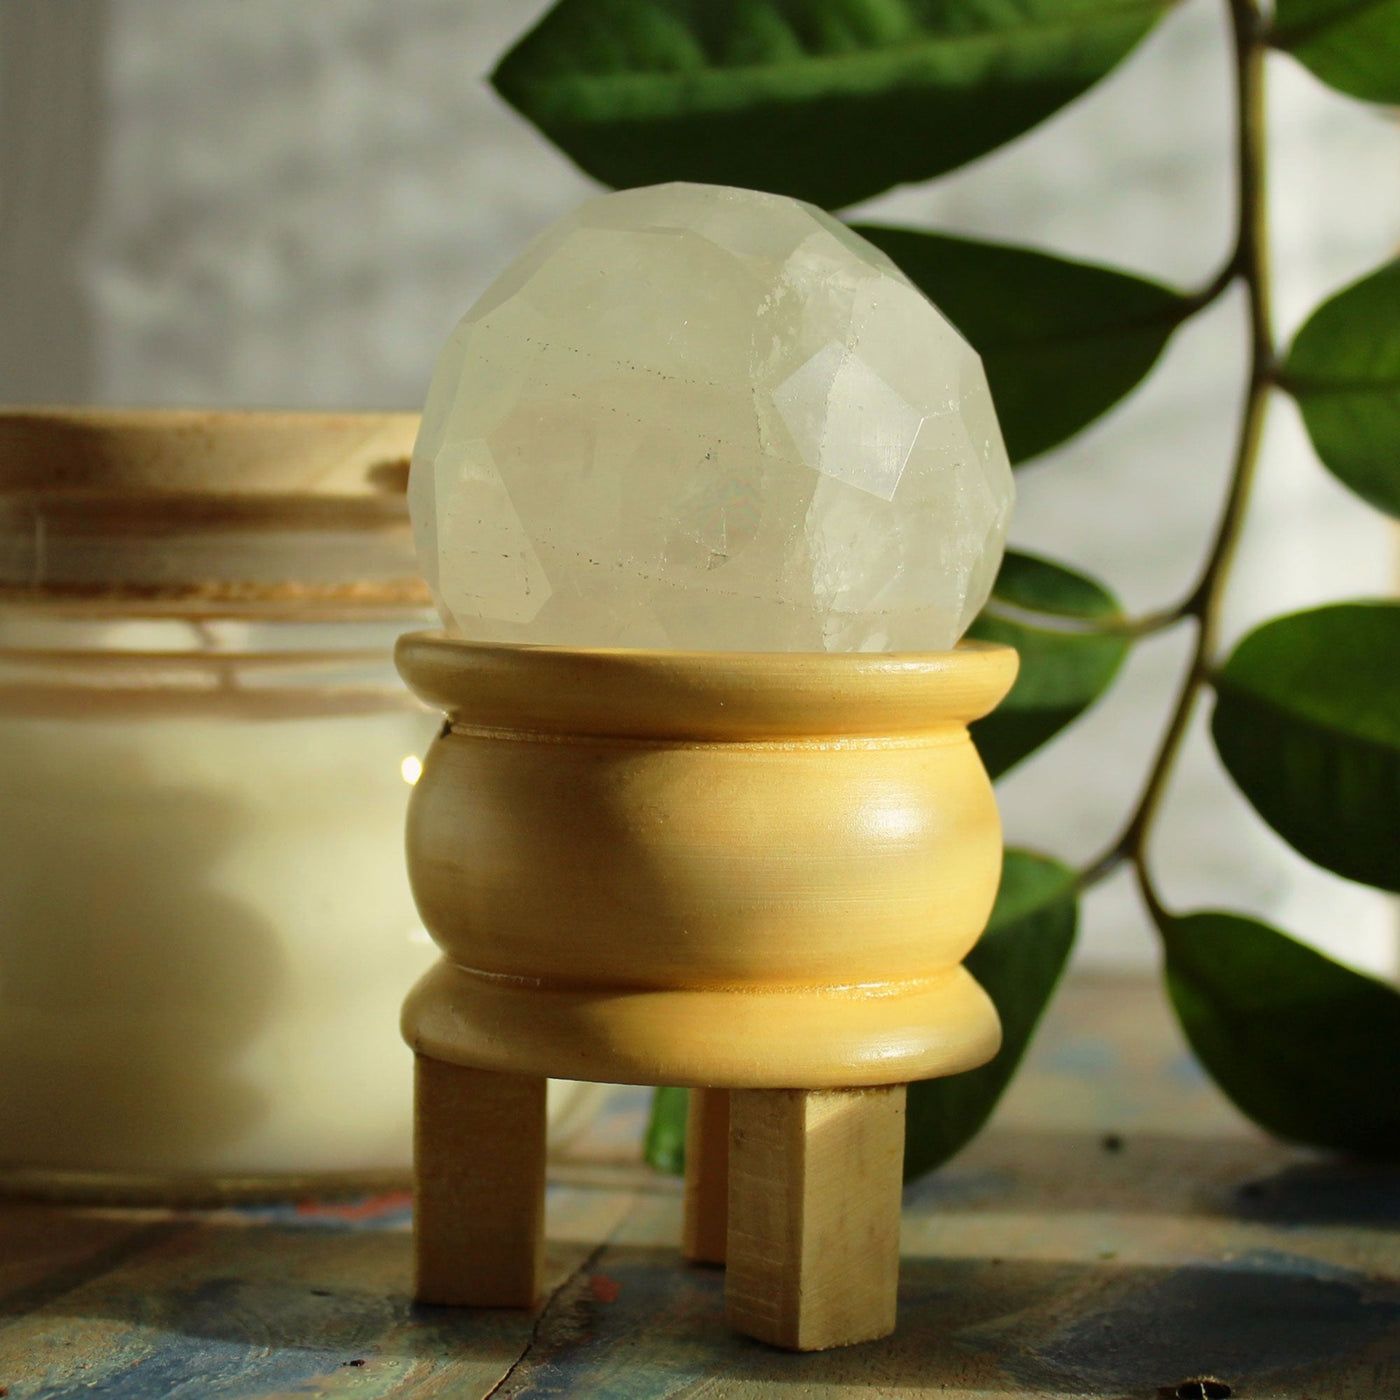 Healing Rose Quartz Gemstone Faceted Ball Ornament With Wooden Stand.